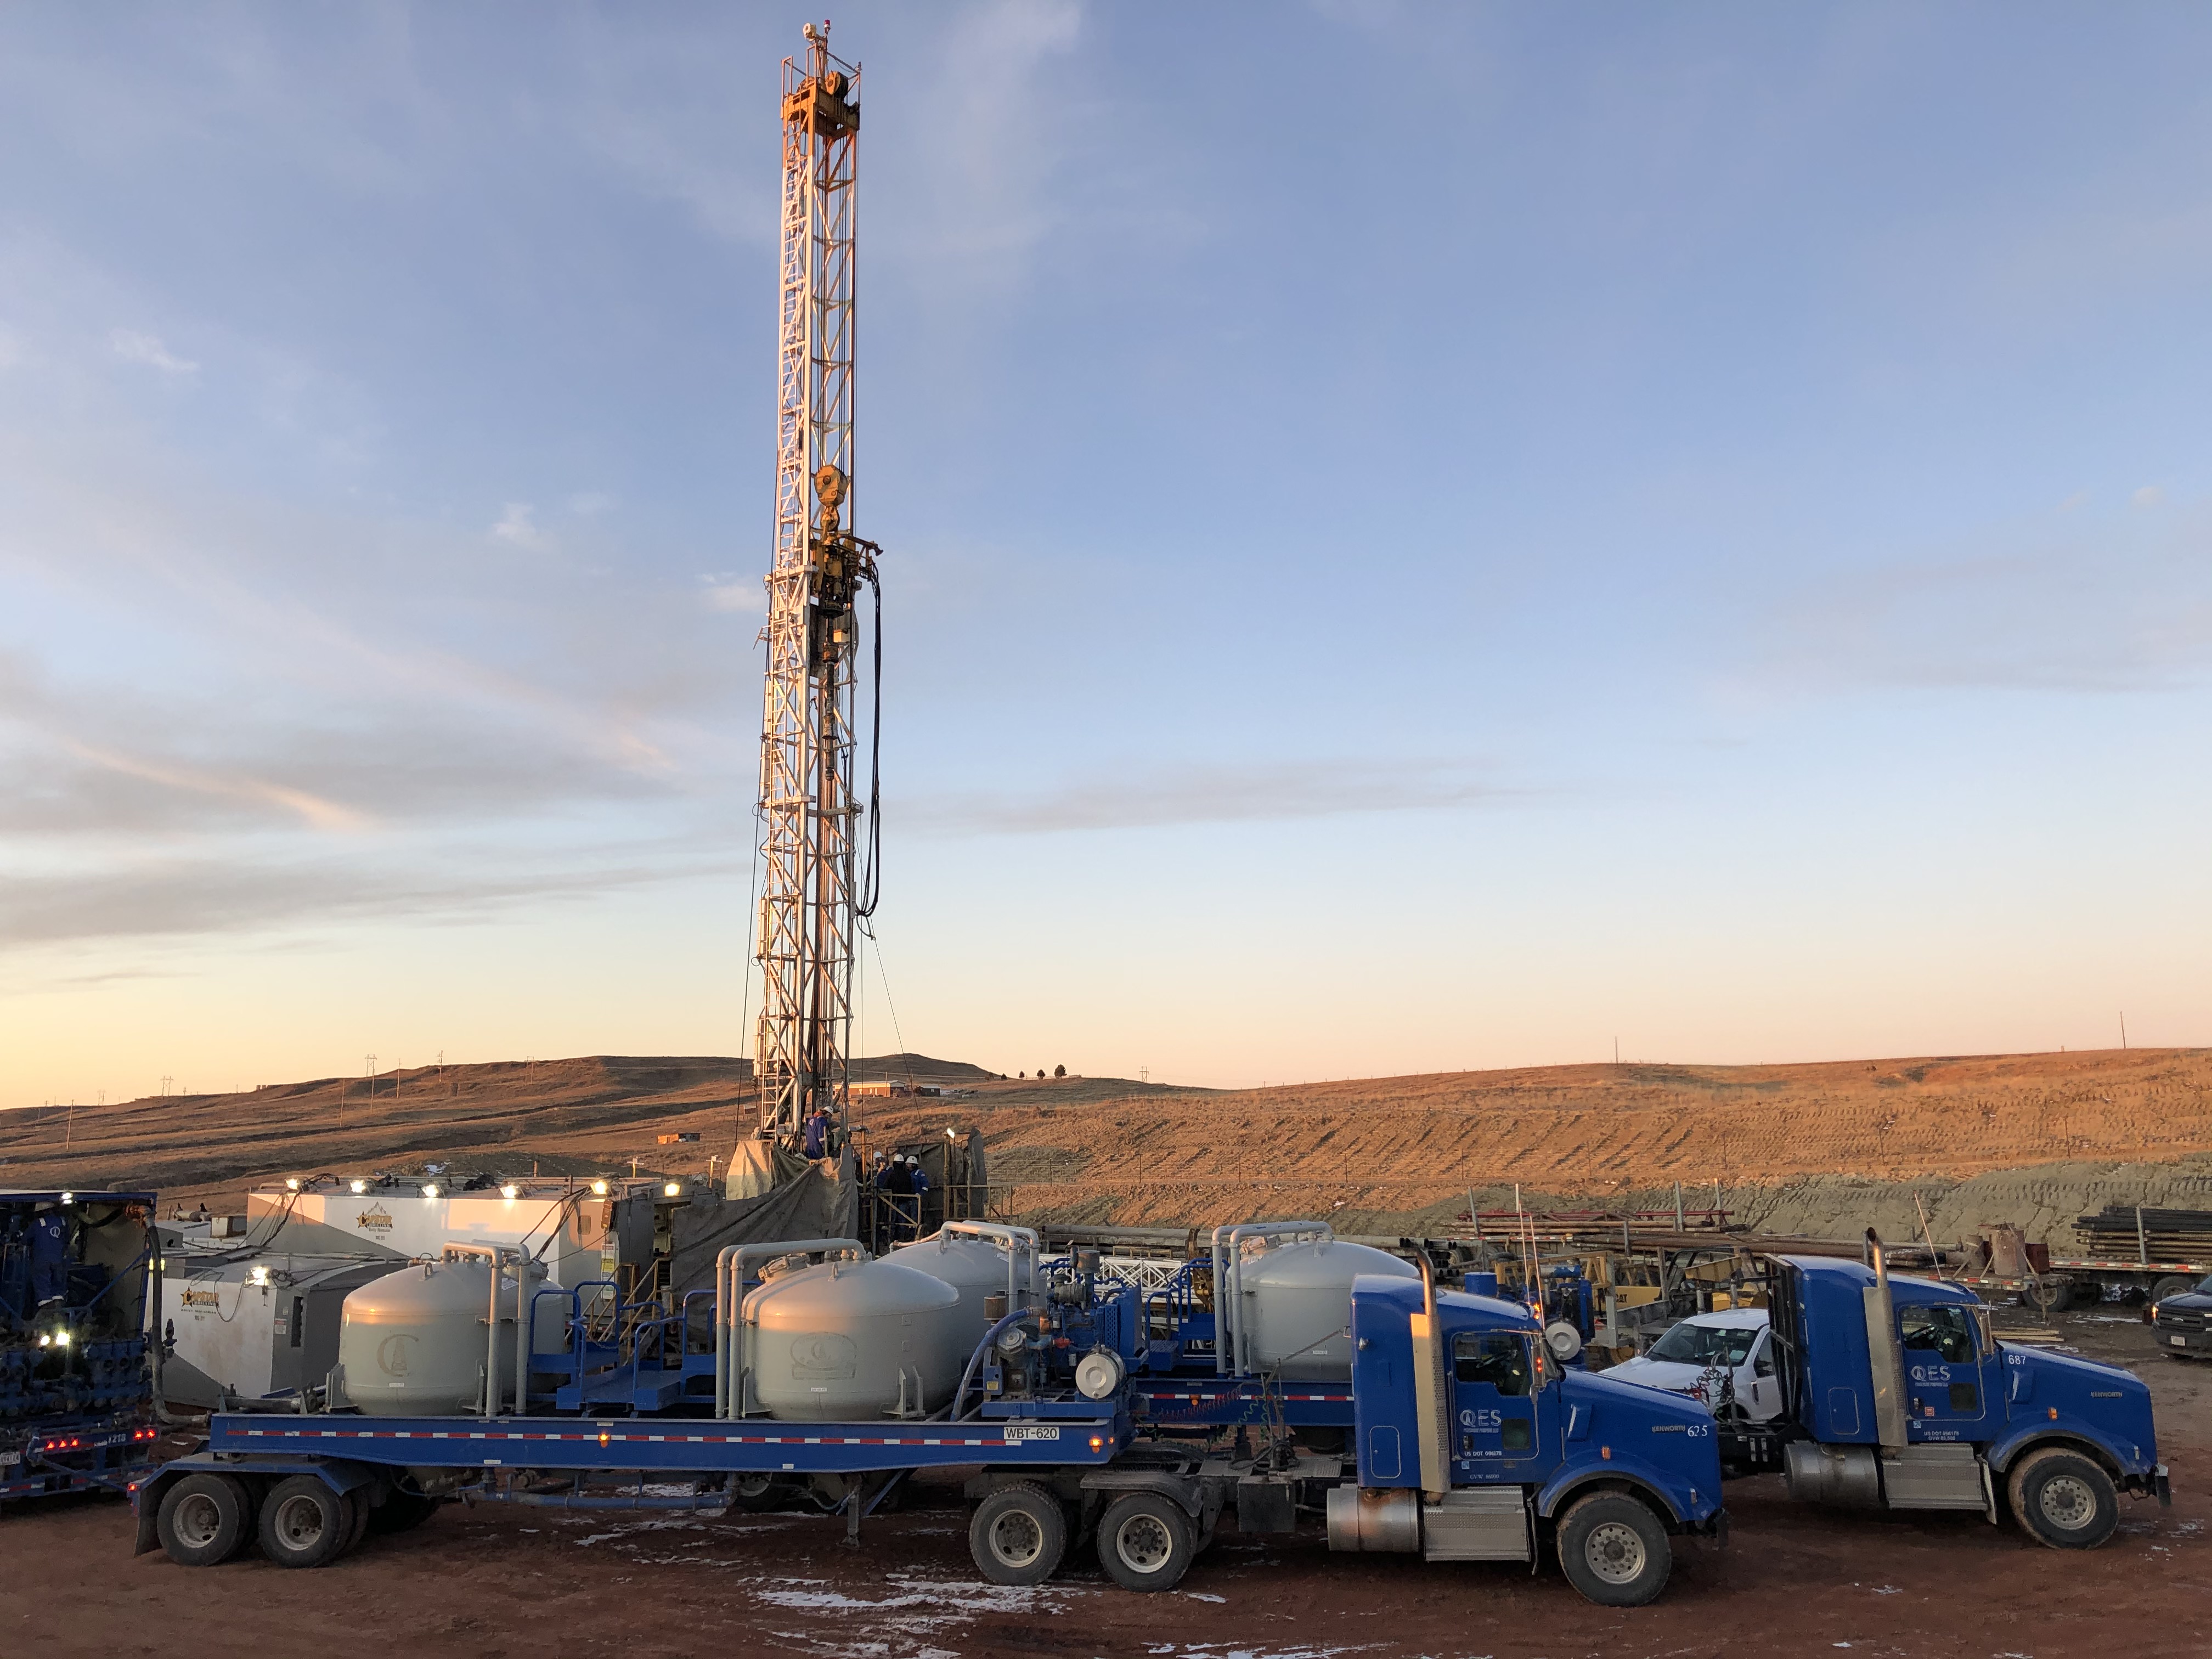 Drilling oil well at Powder River Basin location, Wyoming